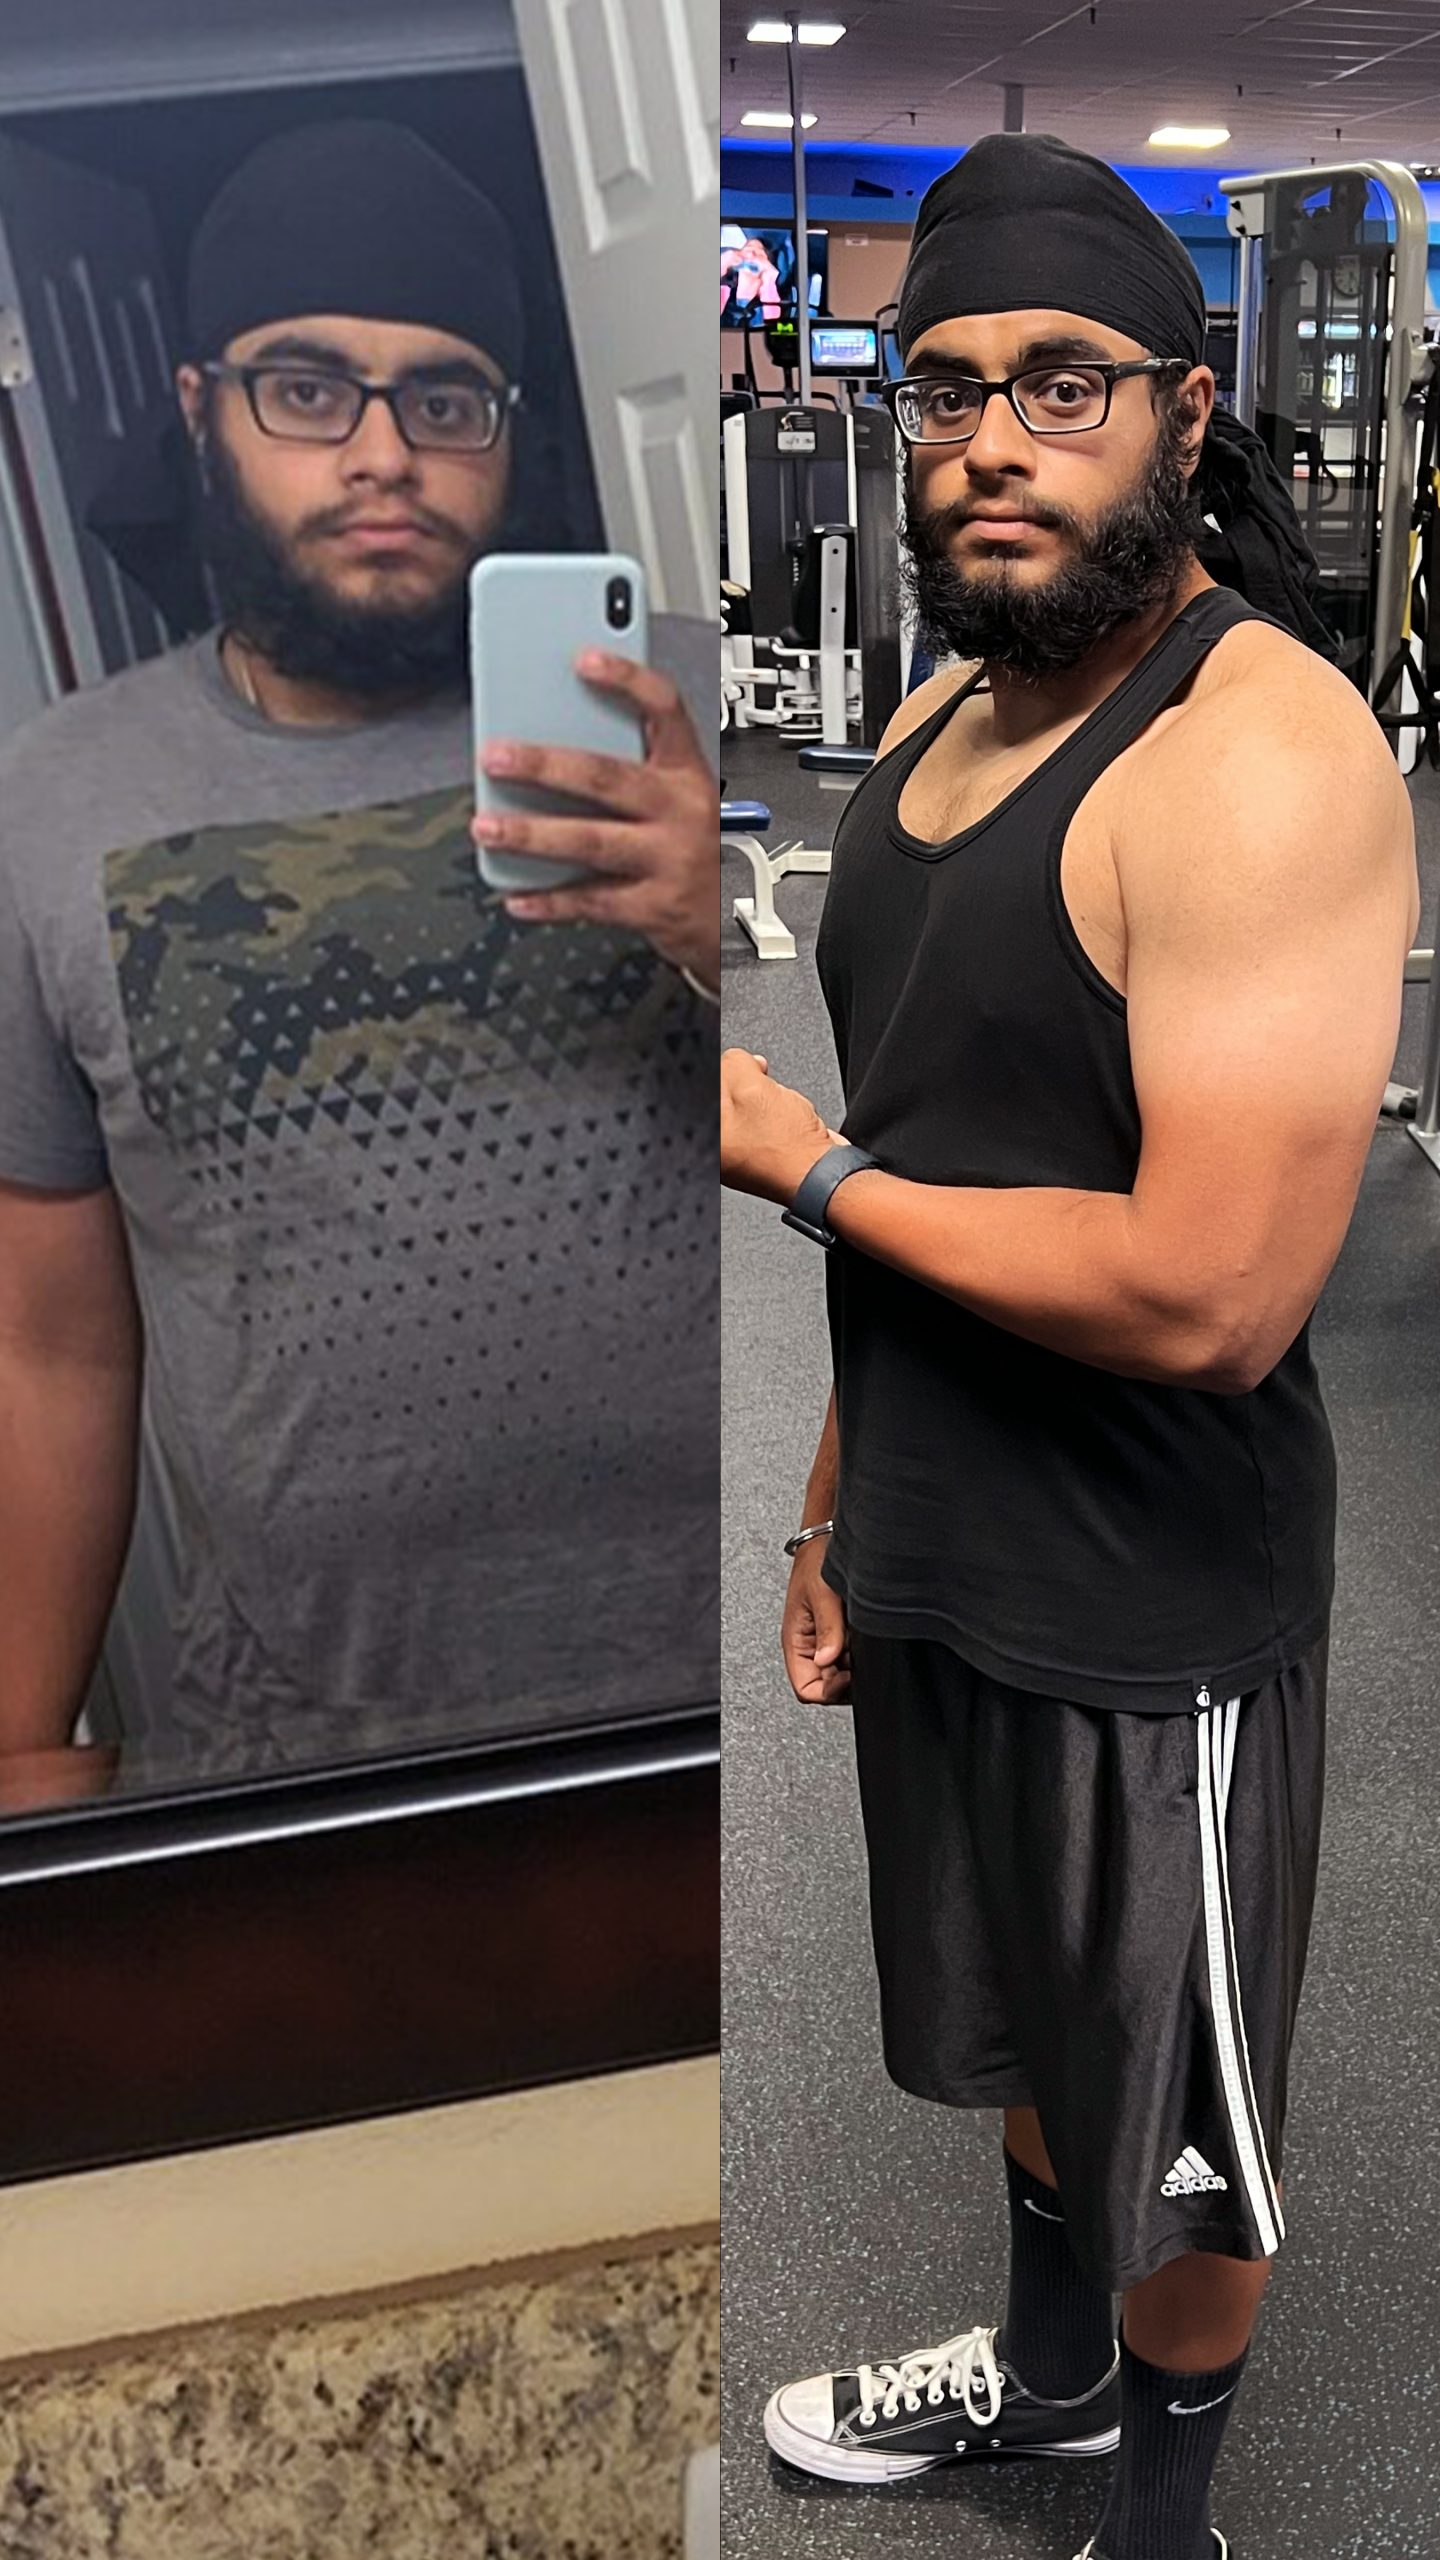 "While working with Rajiv, I was able to lose 37lbs, build muscle, and gain strength on every lift safely"